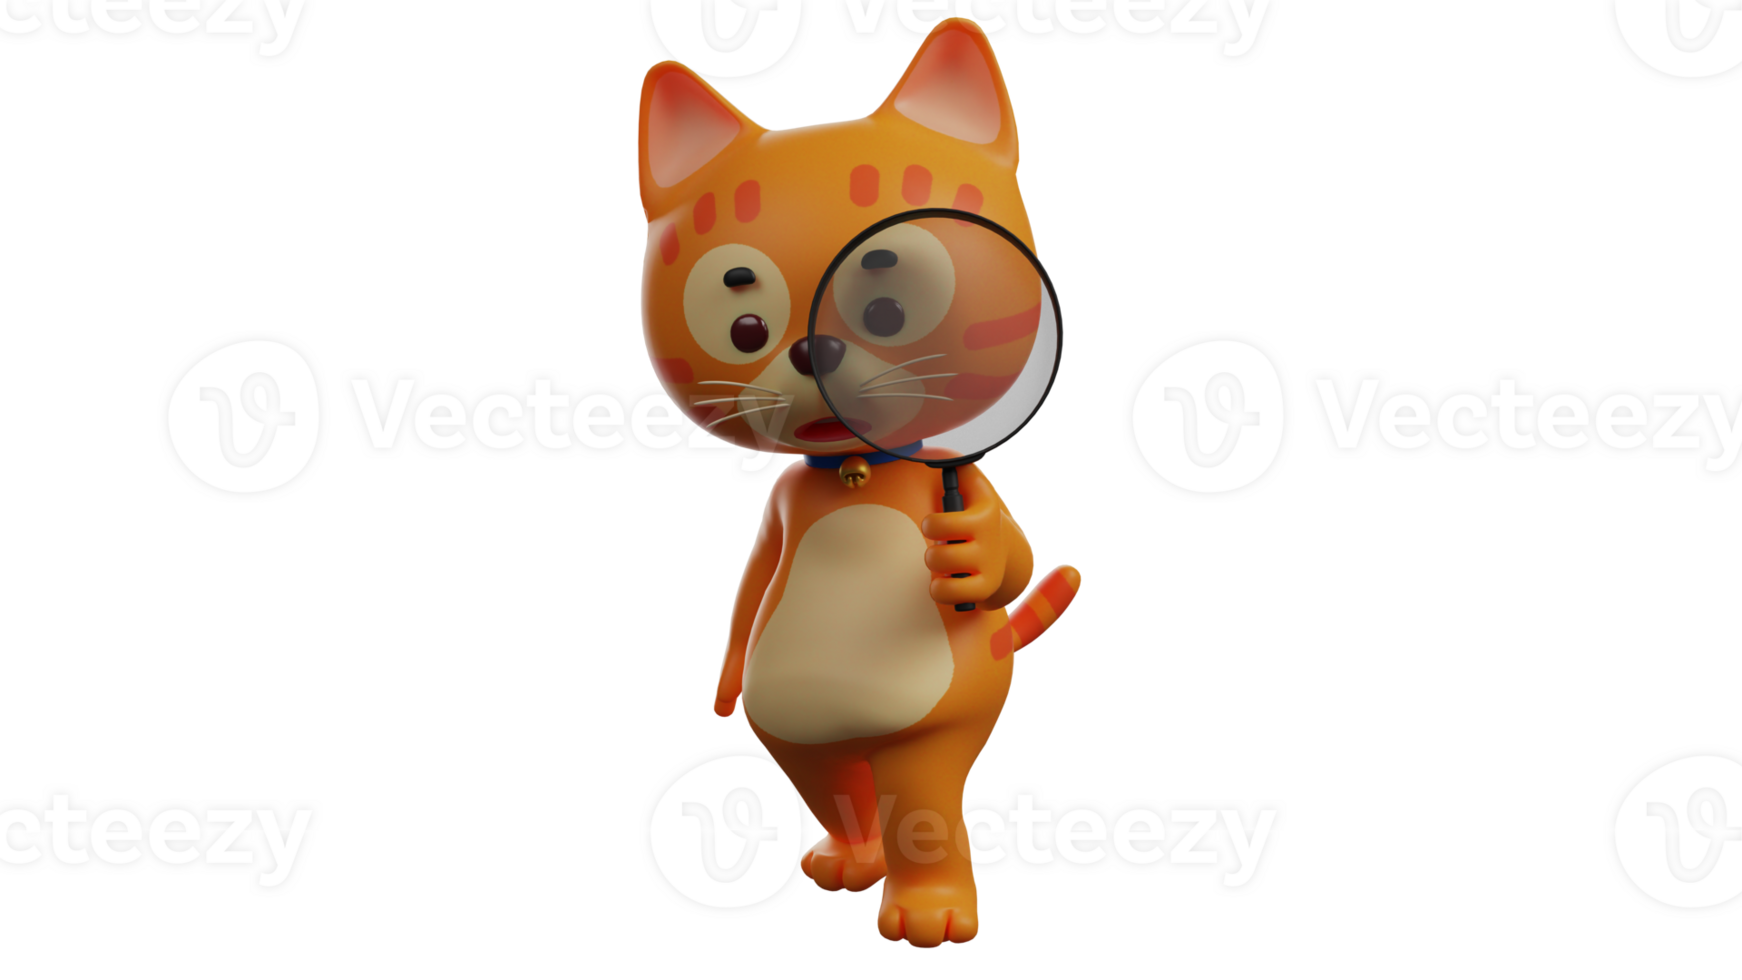 3D illustration. Smart Orange Cat 3D Cartoon Character. A smart cat is doing a study using a magnifying glass. The orange catfish shows a serious expression. 3D cartoon character png